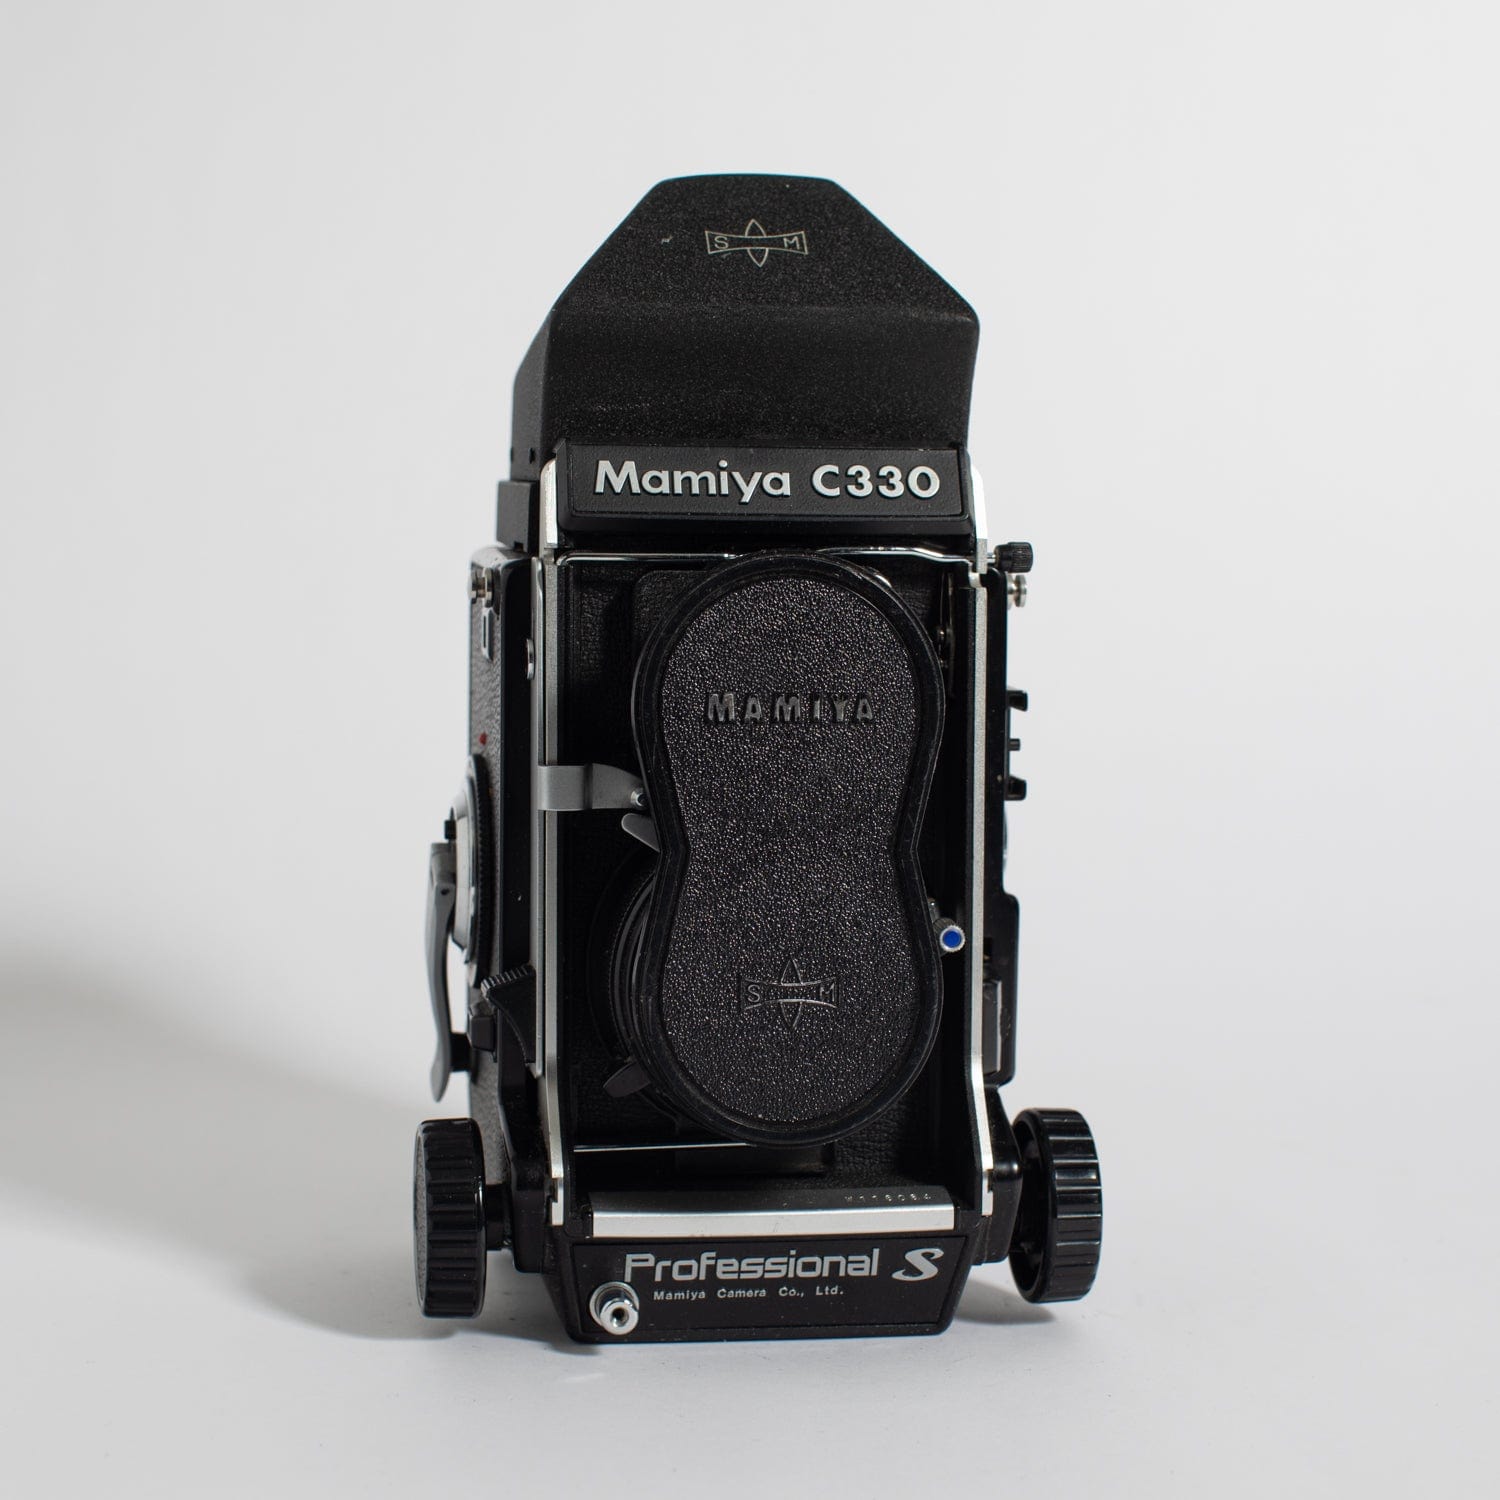 Mamiya C330 Professional S with 80mm f2.8 Lens and Eye Level Prism ...